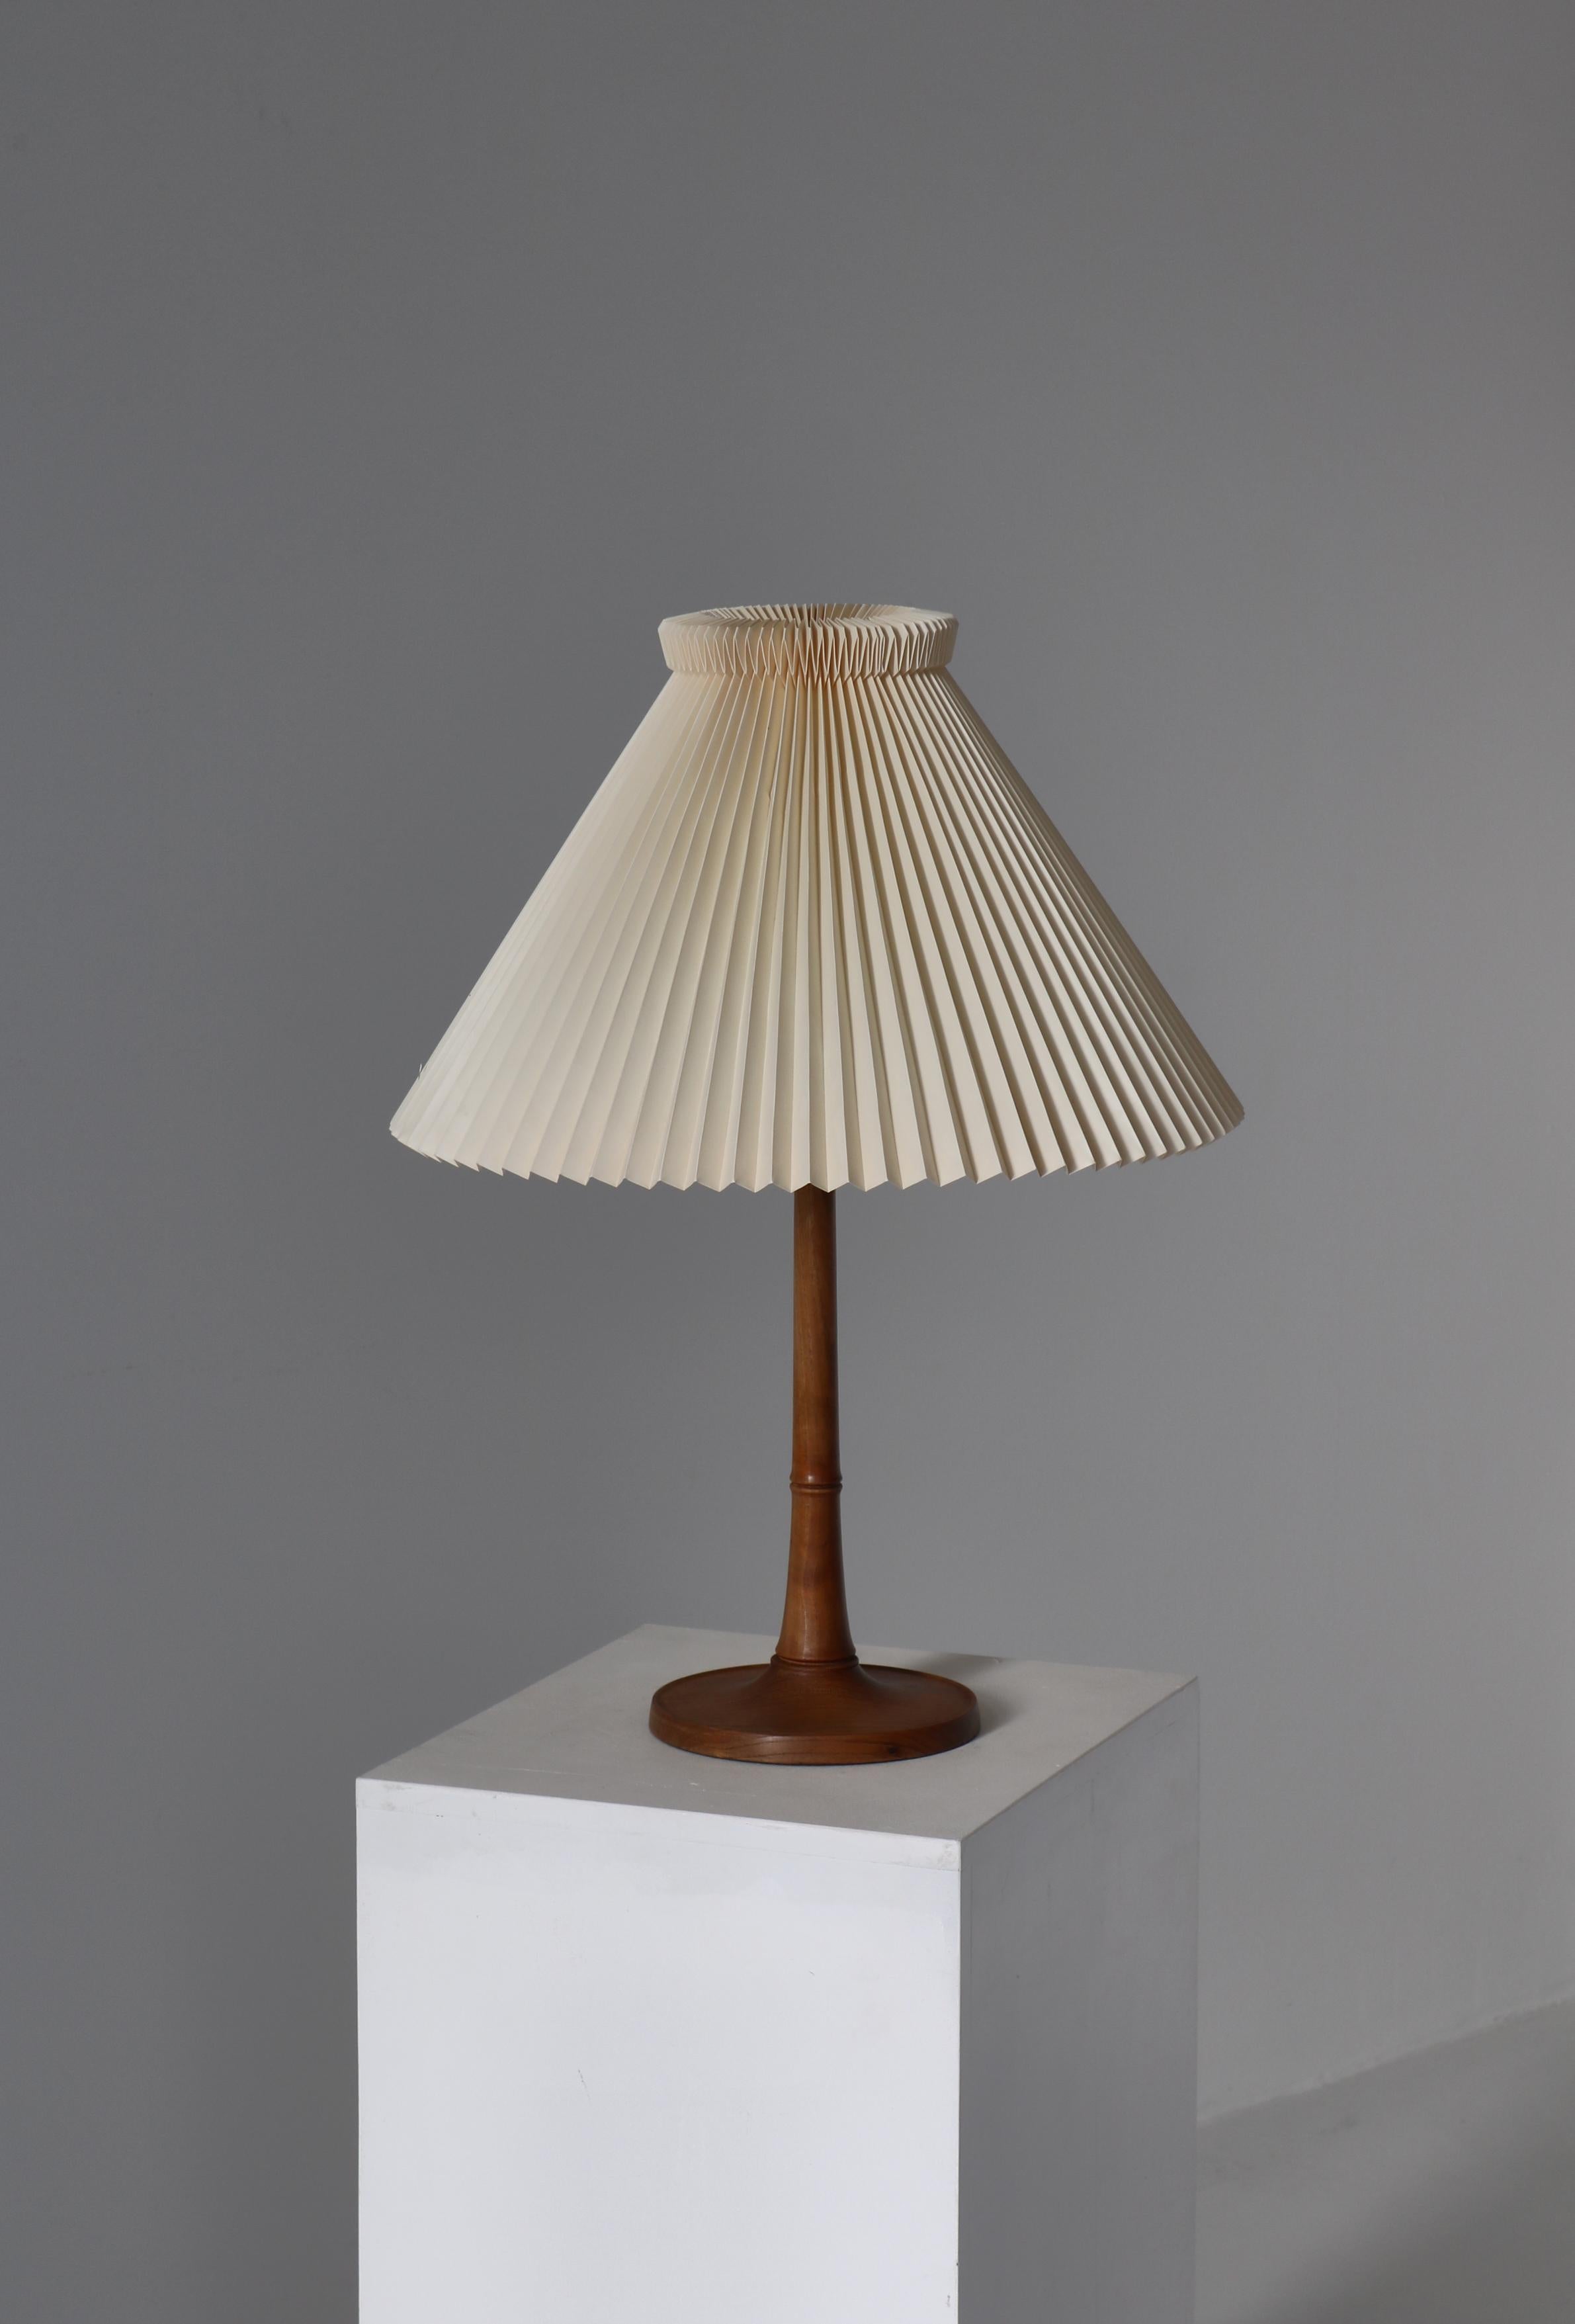 Early and important Le Klint table lamp Model 301 in beautifully patinated solid ash wood with hand folded Le Klint shade. The lamp was designed by Kaare Klint in the 1940s and is associated with Danish Modern furniture by Hans J. Wegner, Mogens